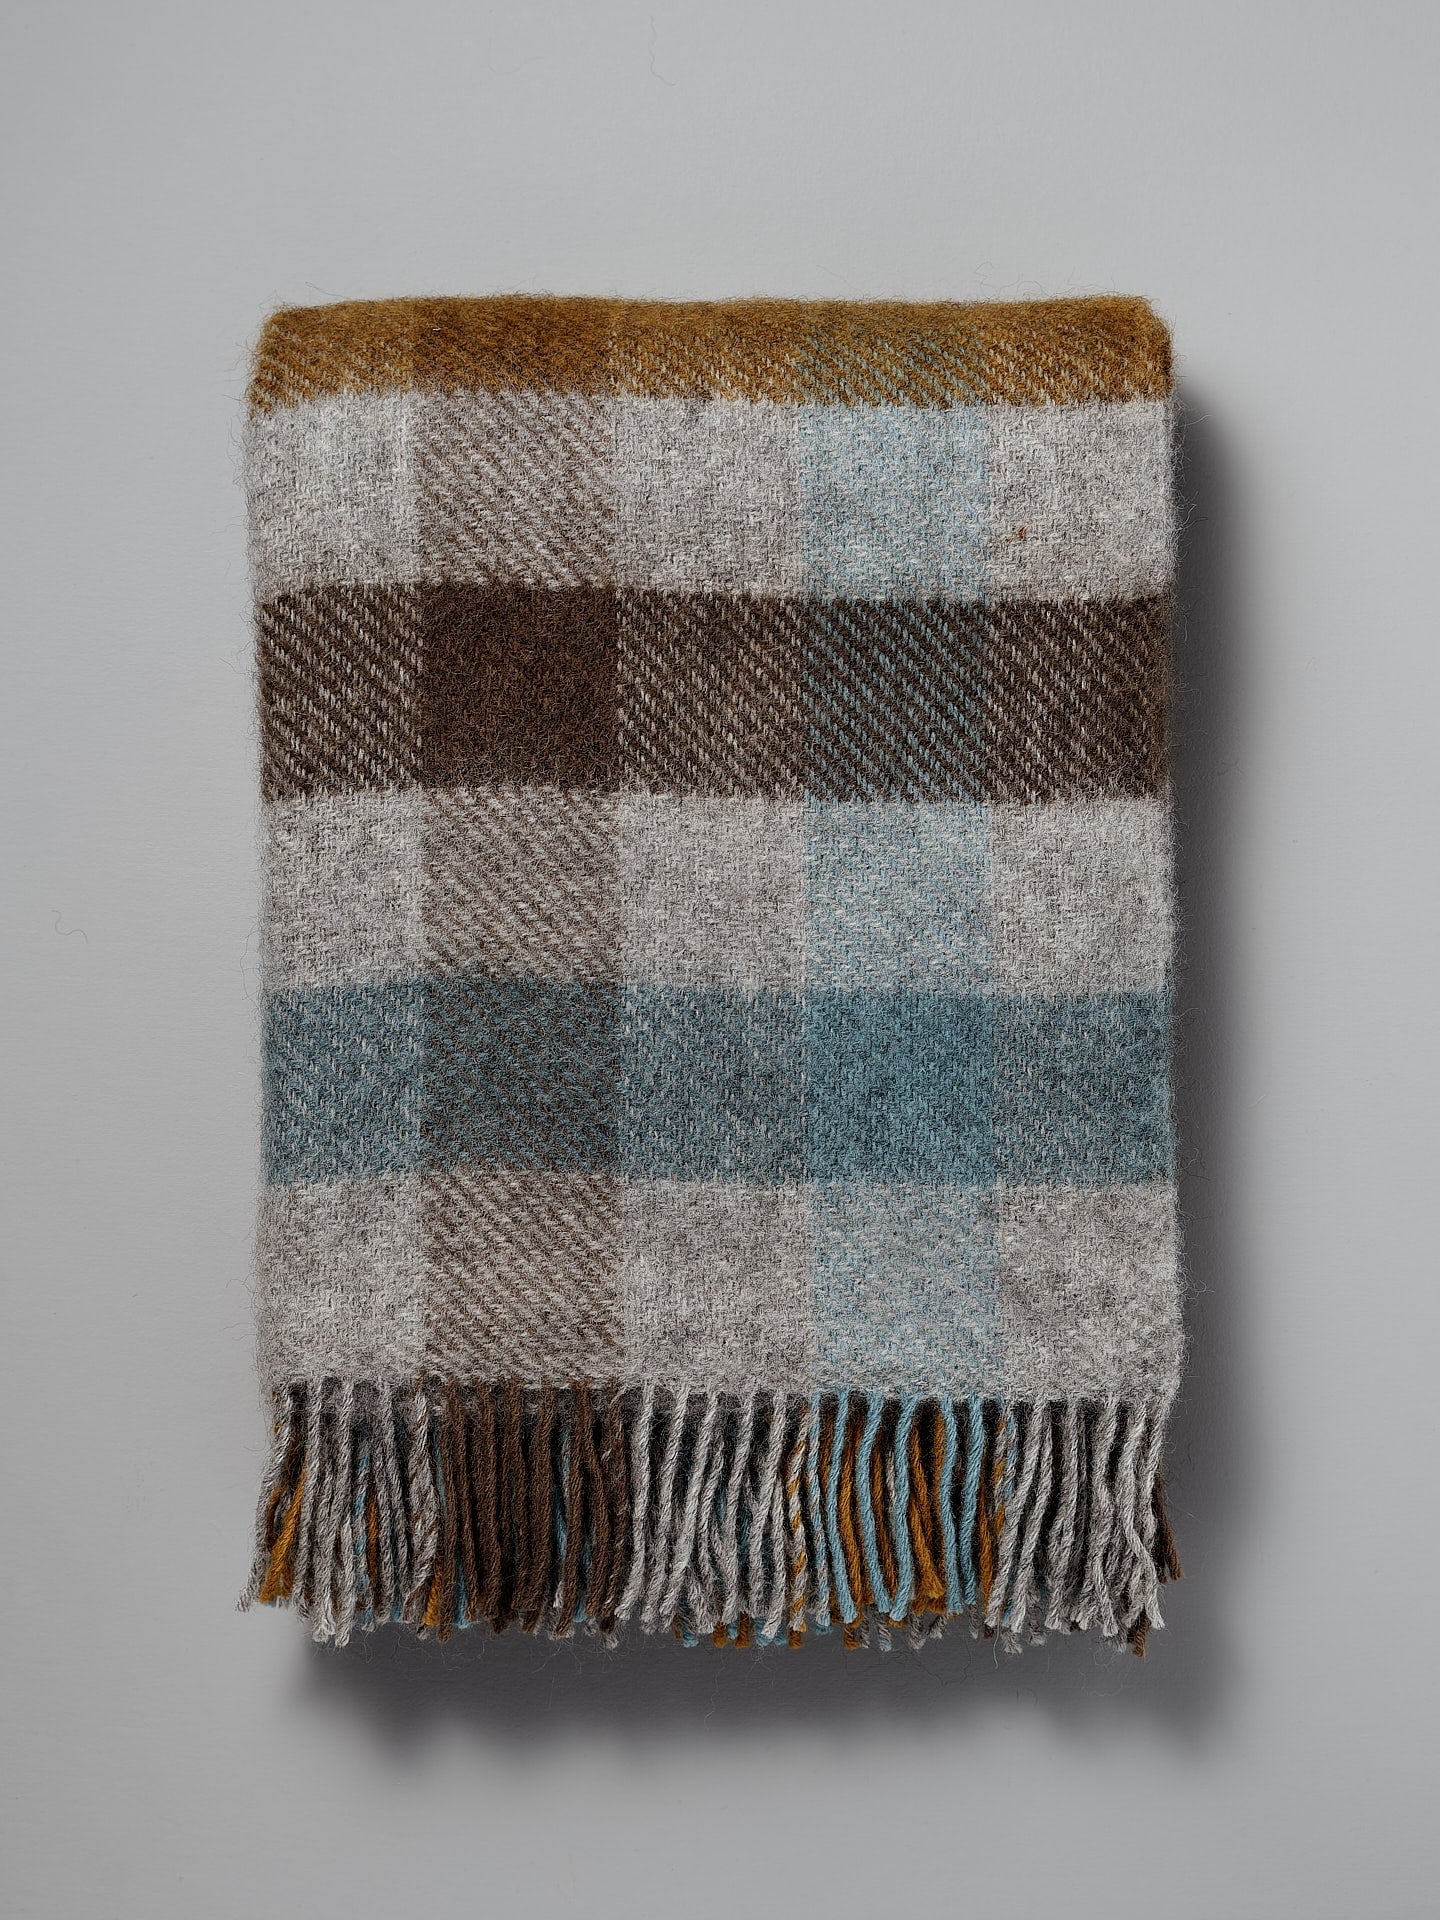 A Gotland Wool Throw – Multi Turquoise with fringes on a white background.